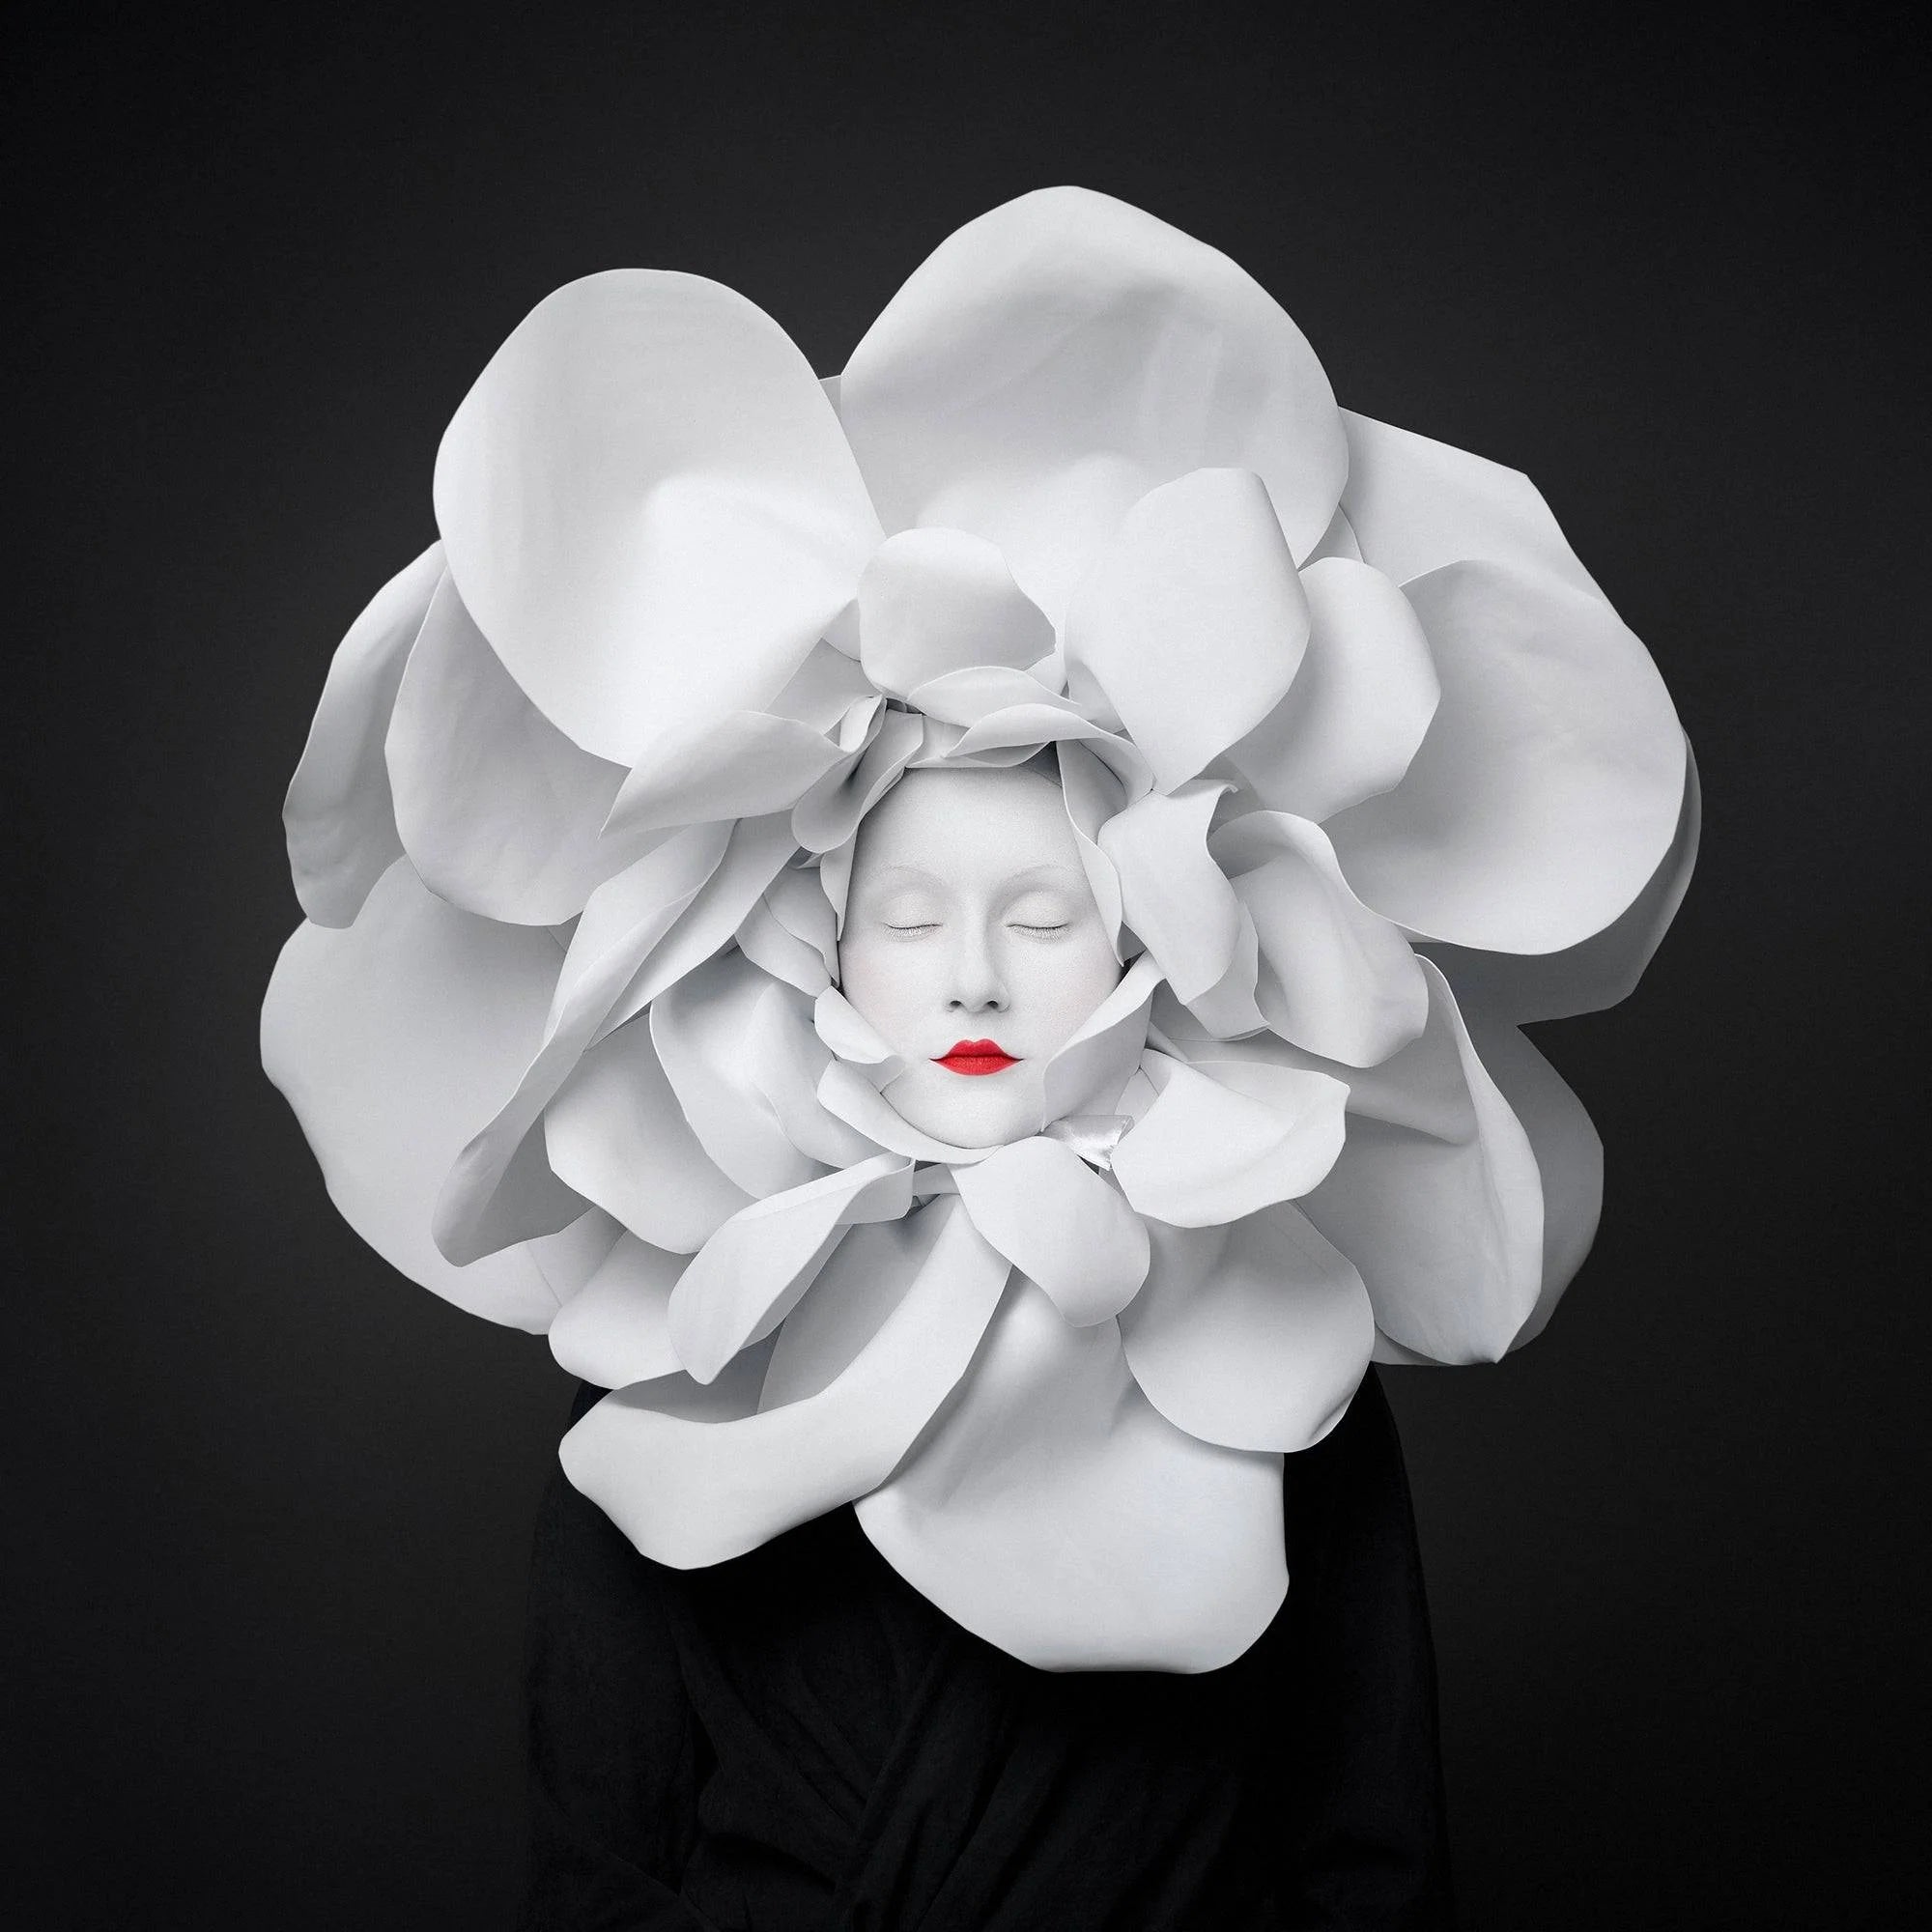 "Ethereal" By Flora Borsi, mini edition